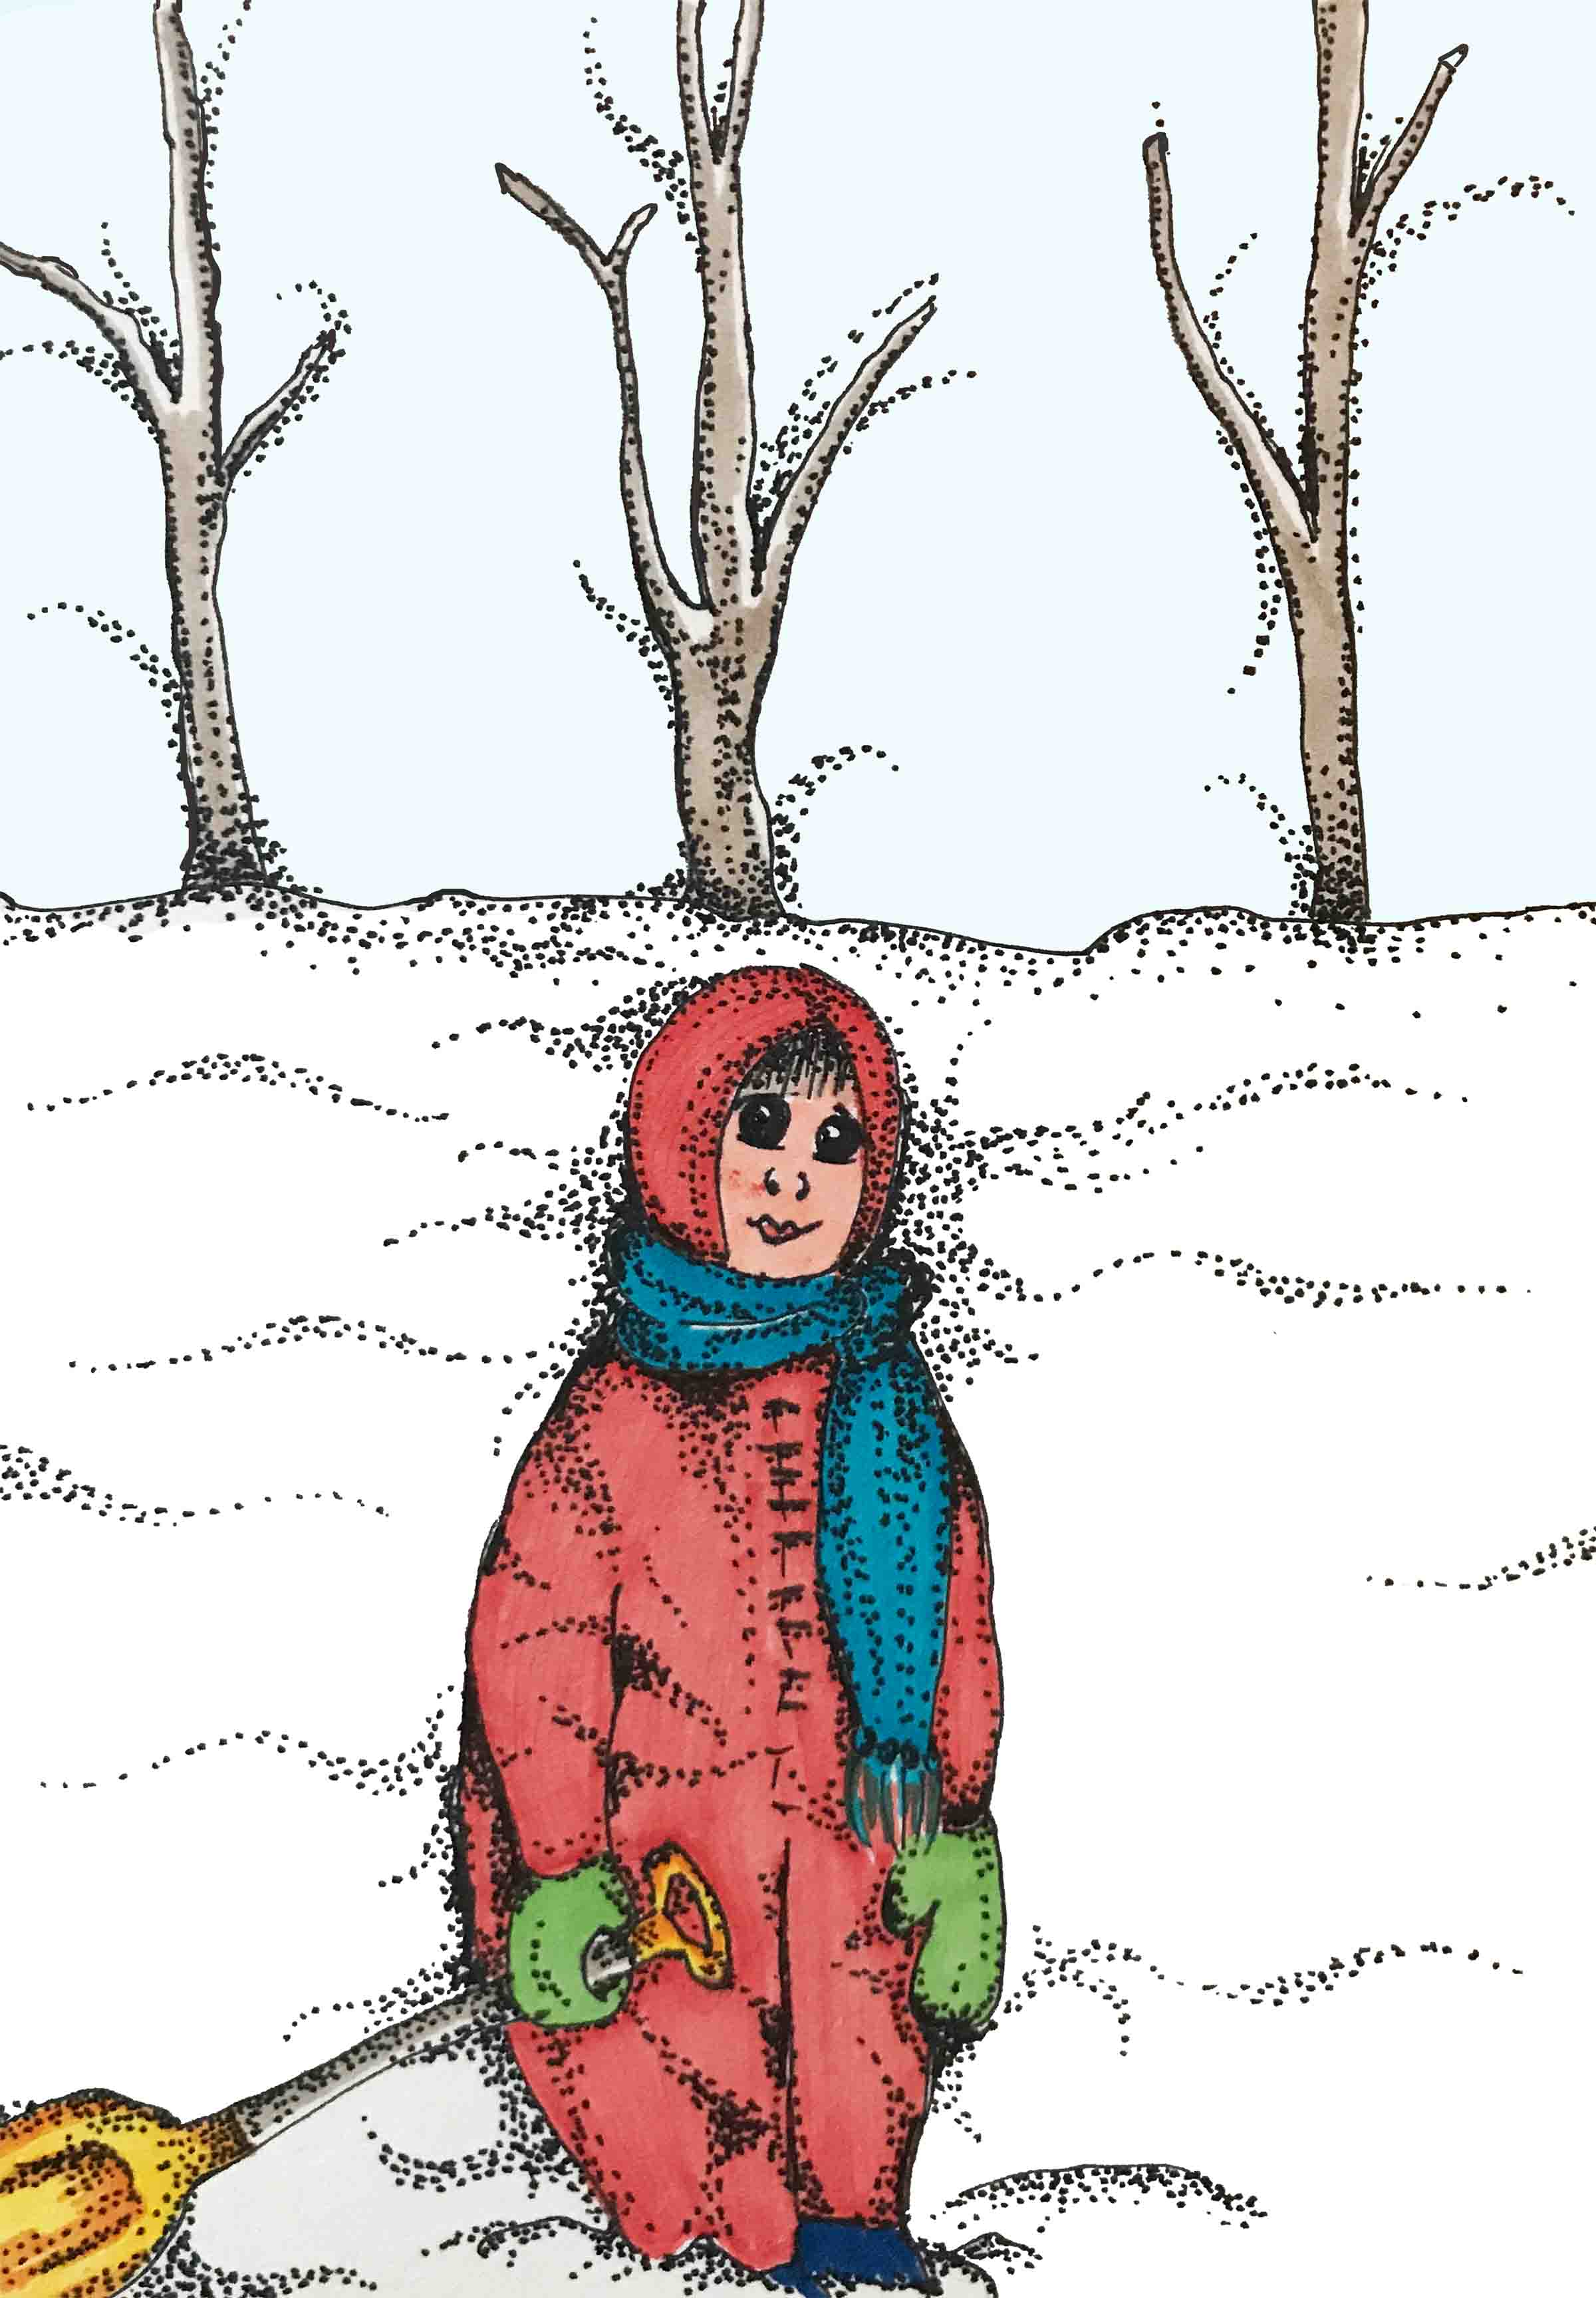 art every day number 438 / illustration / snow